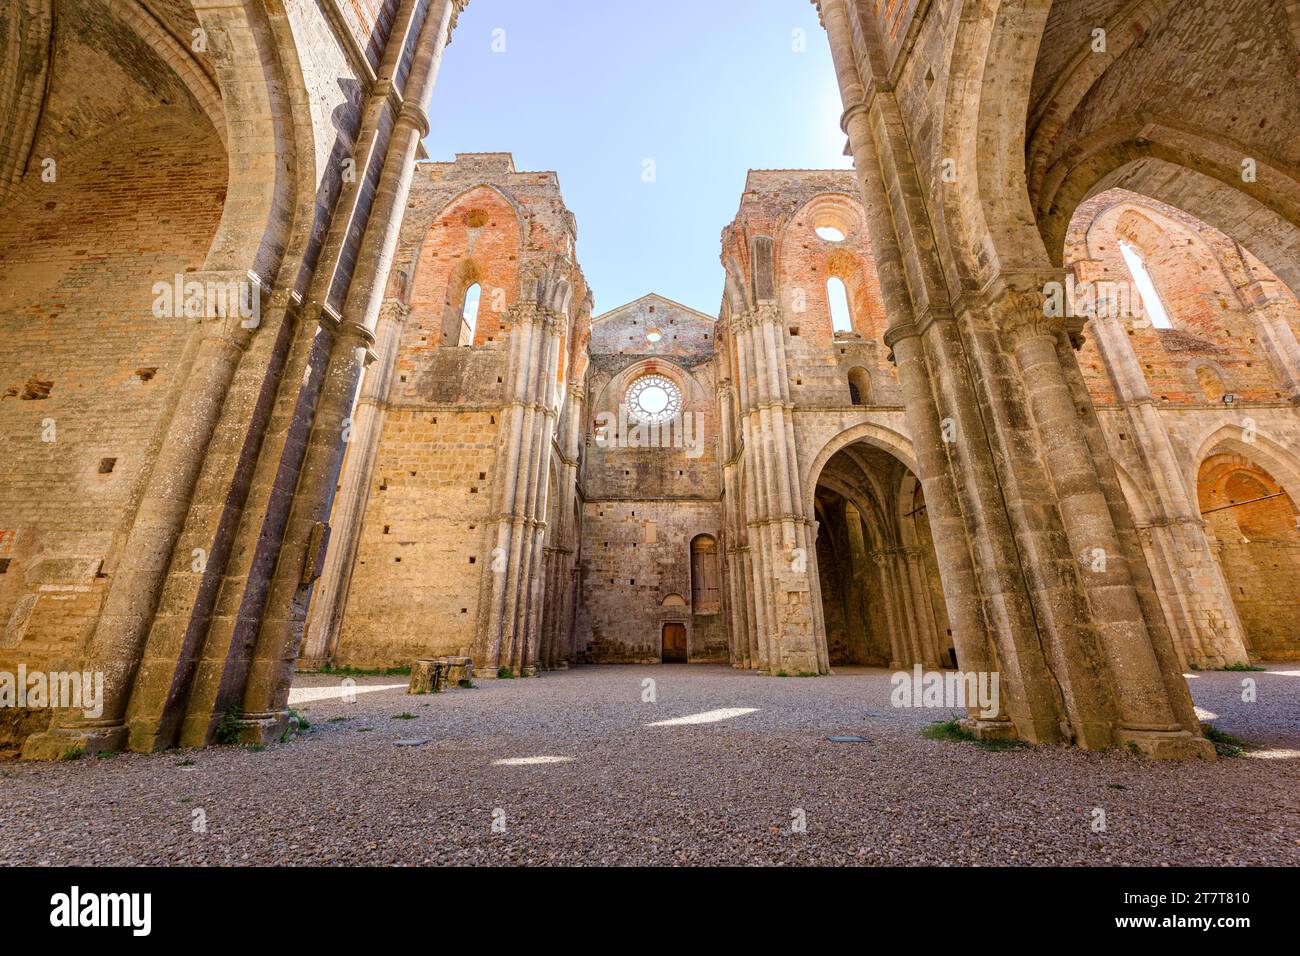 Transept elevation of abandoned San Galgano Abbey, a Cistercian monastery from the Middle Ages built in Chiusdino, a Tuscany countryside village in Ce Stock Photo